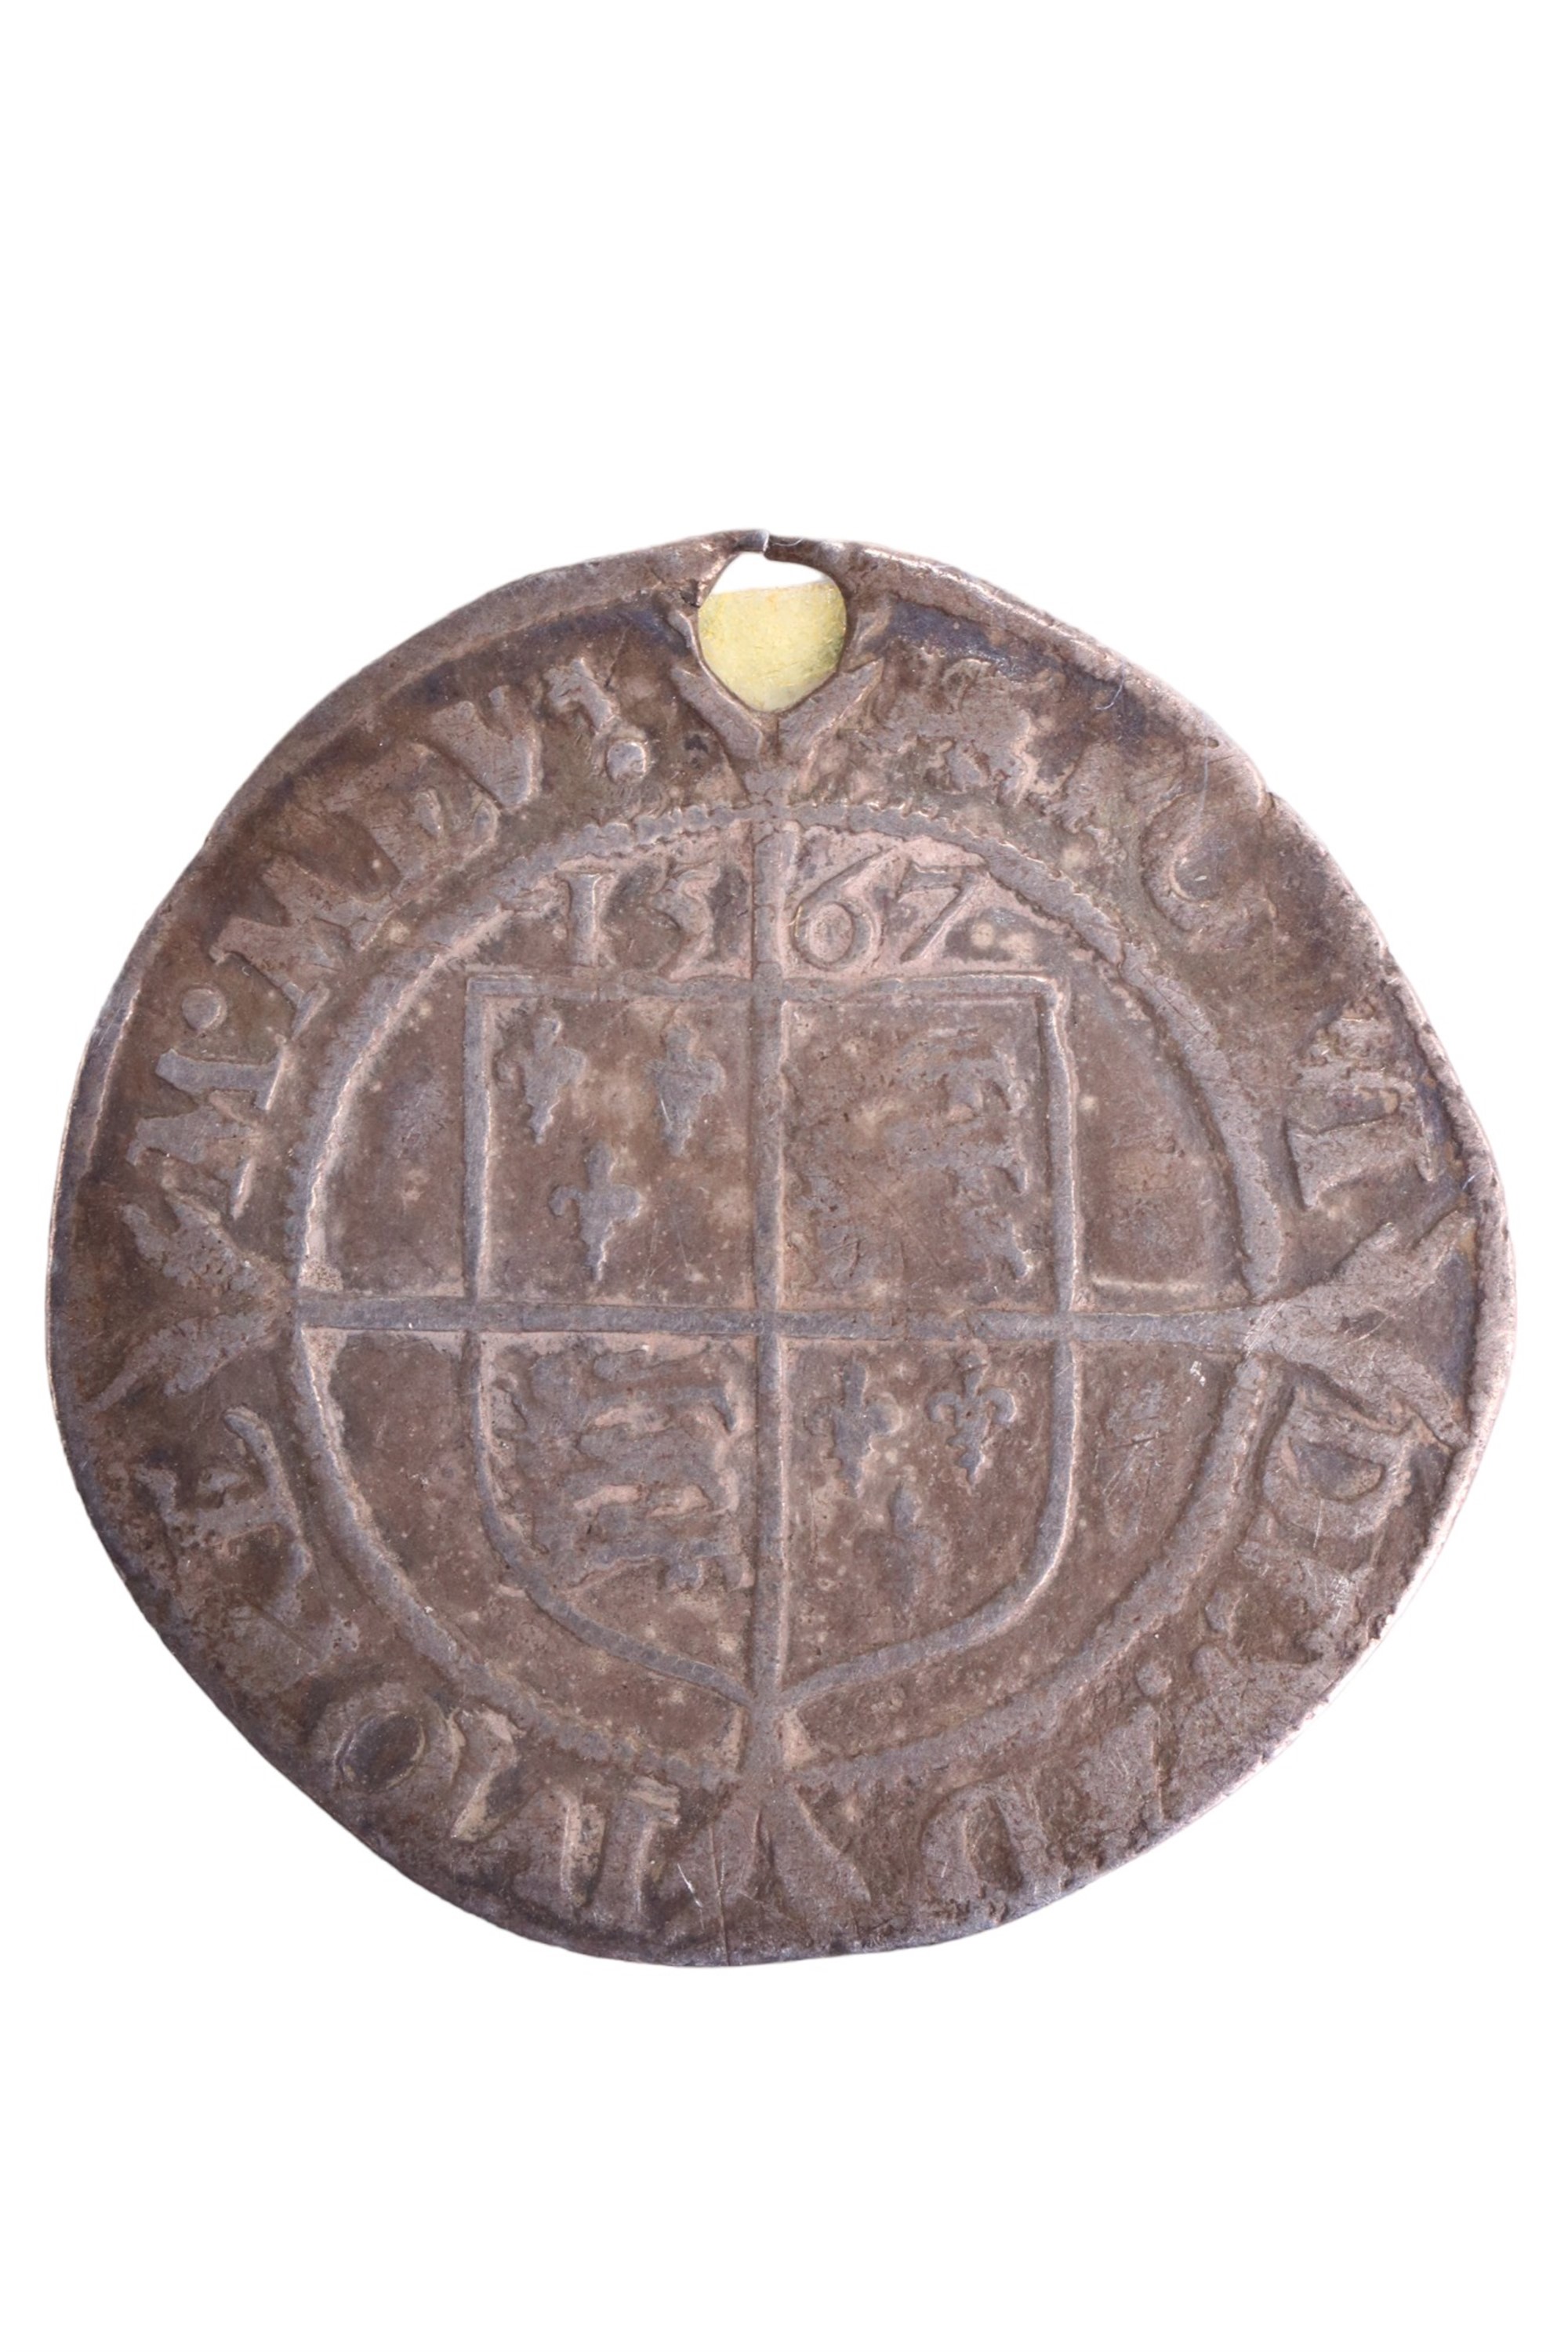 An Elizabeth I silver sixpence coin, third/fourth issue, lion Tower Mint mark - Image 2 of 2